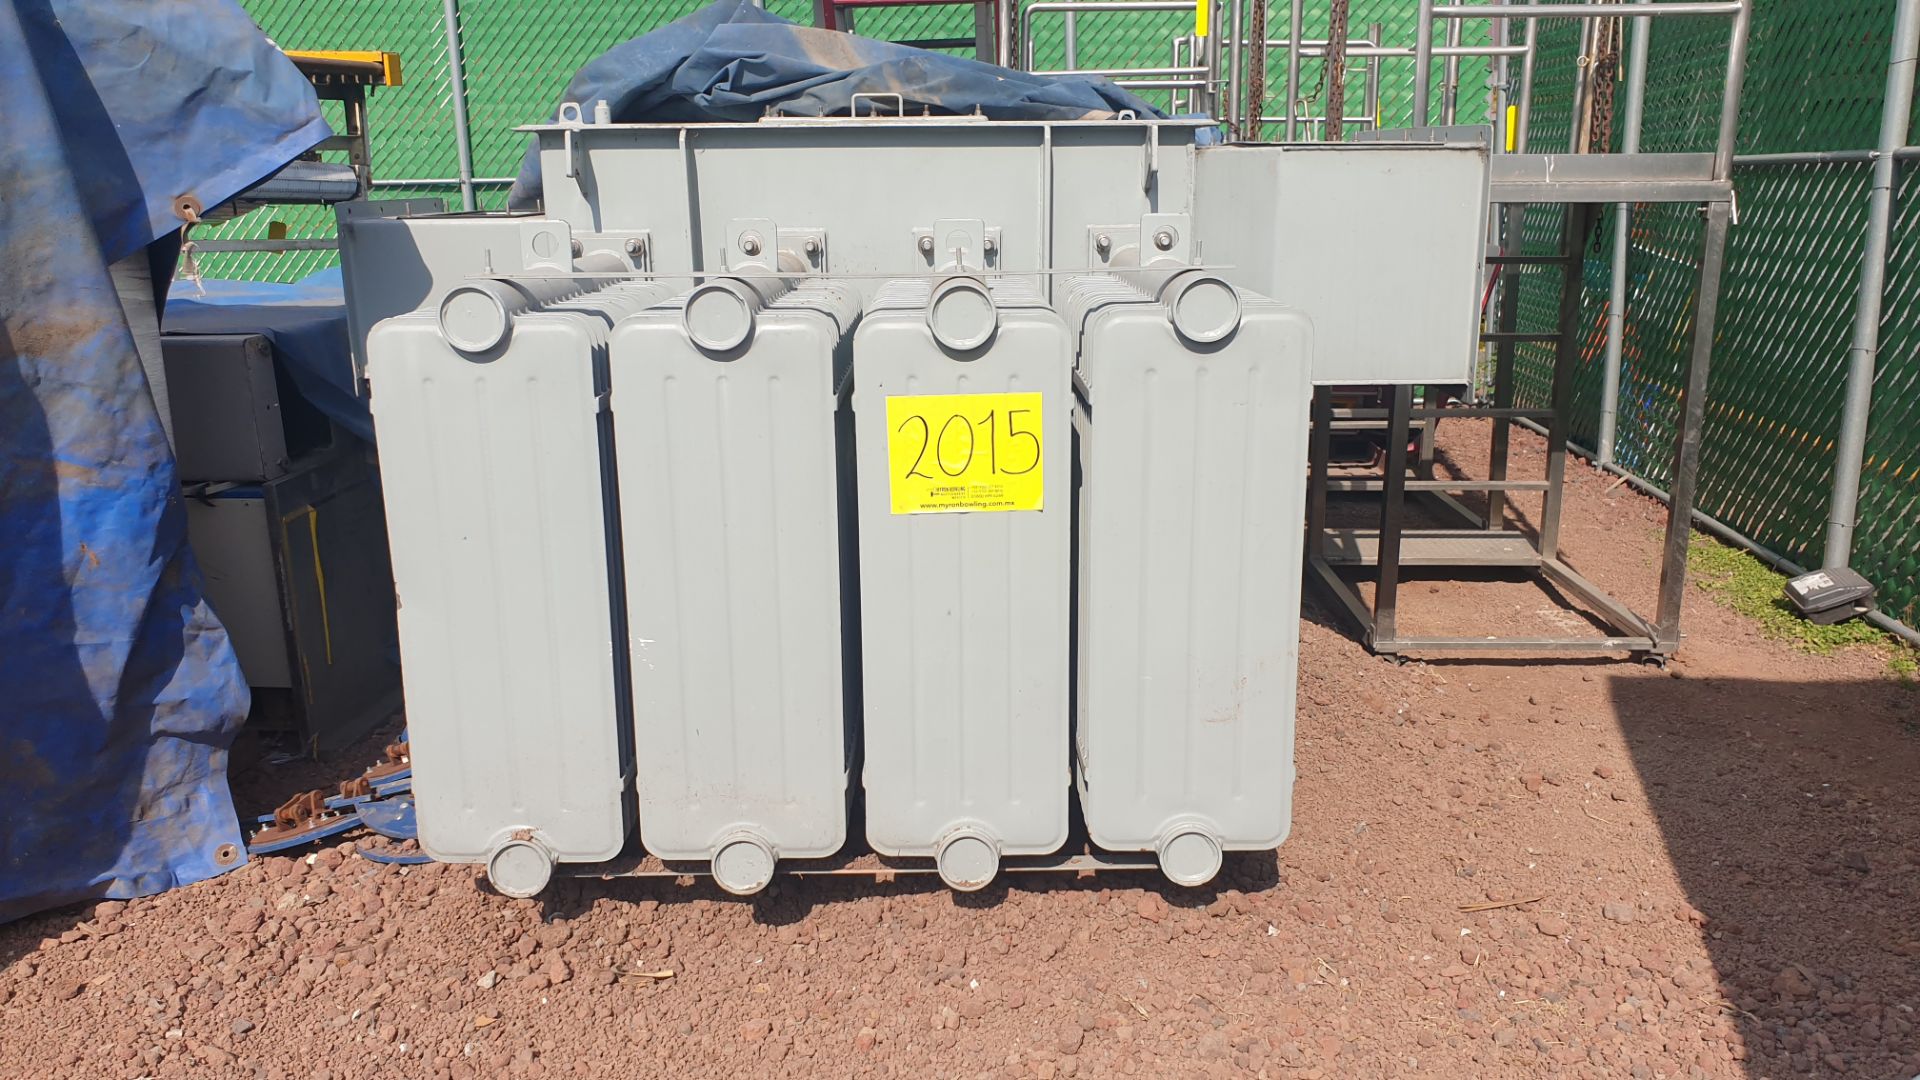 1 PROLEC Transformer in oil of 2000KVA - Image 4 of 17